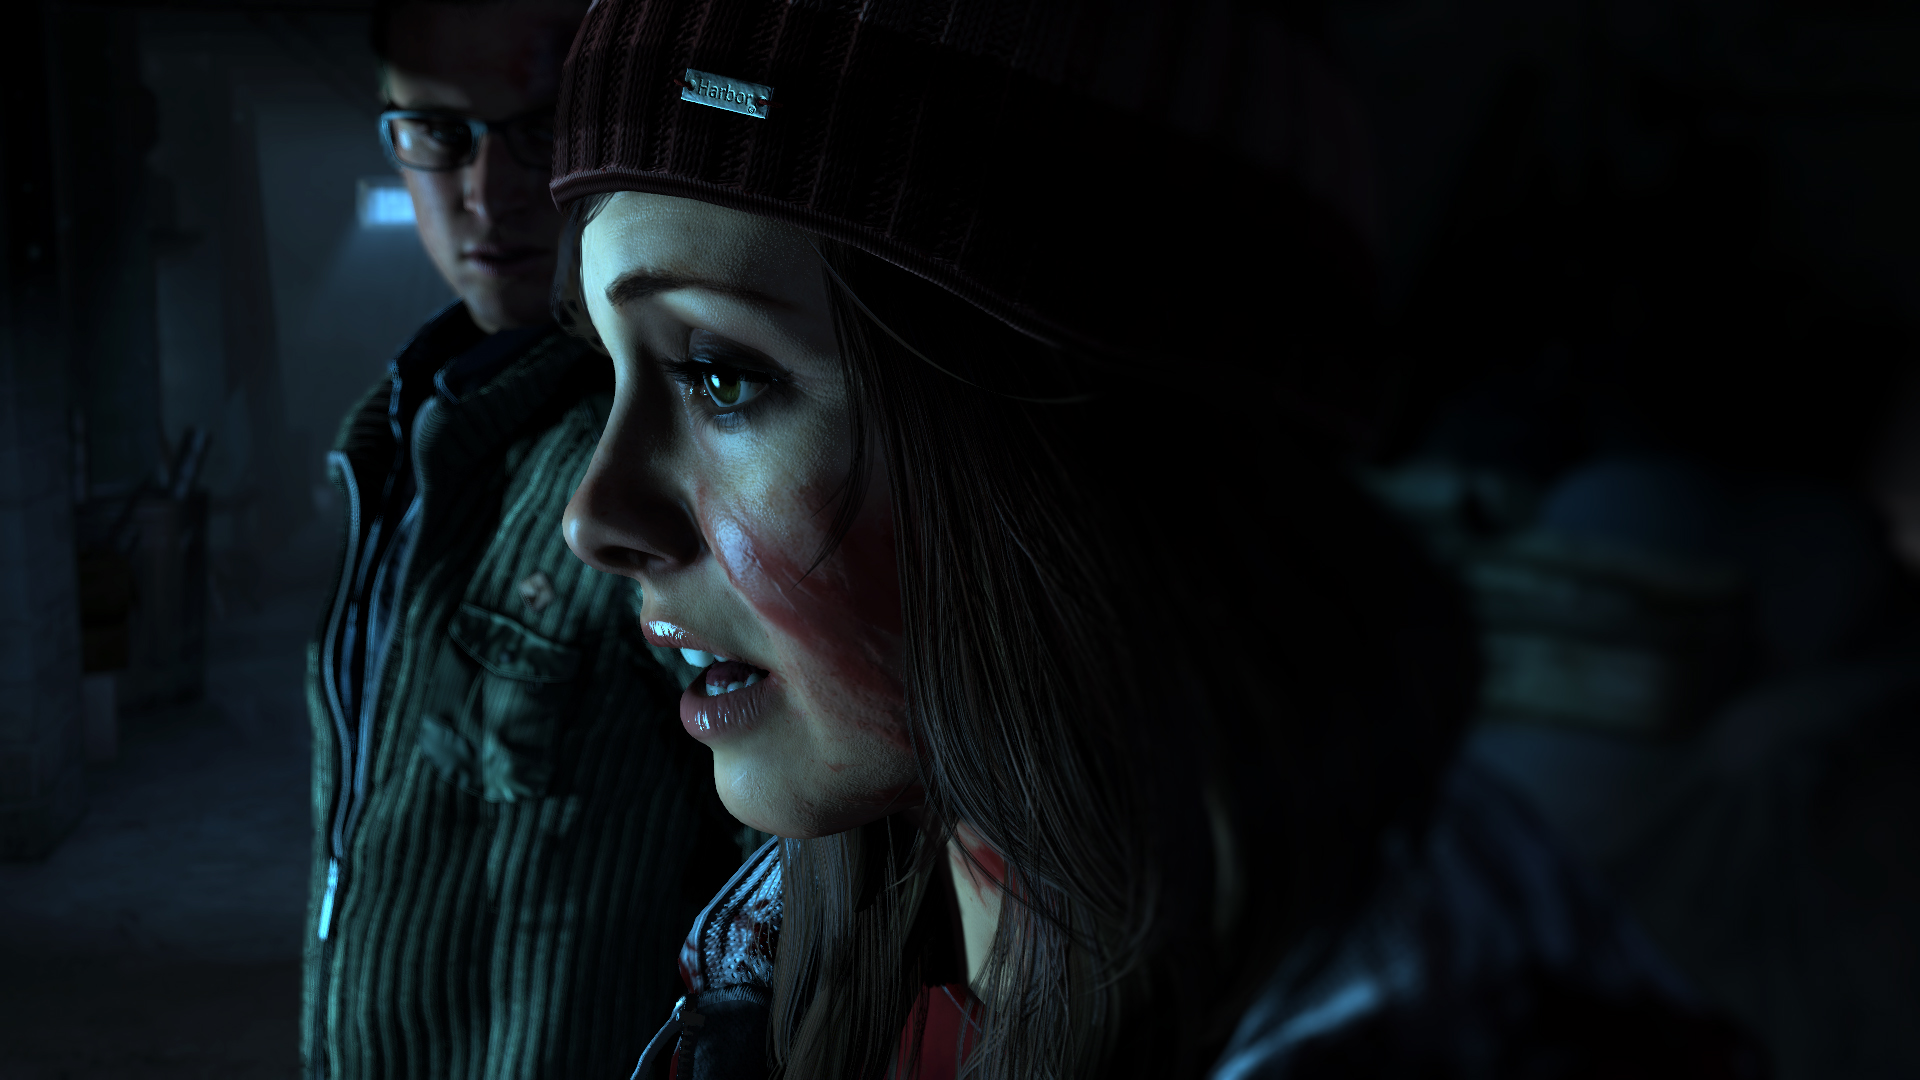 You Can Until Dawn HD Wallpaper In Your Puter By Clicking